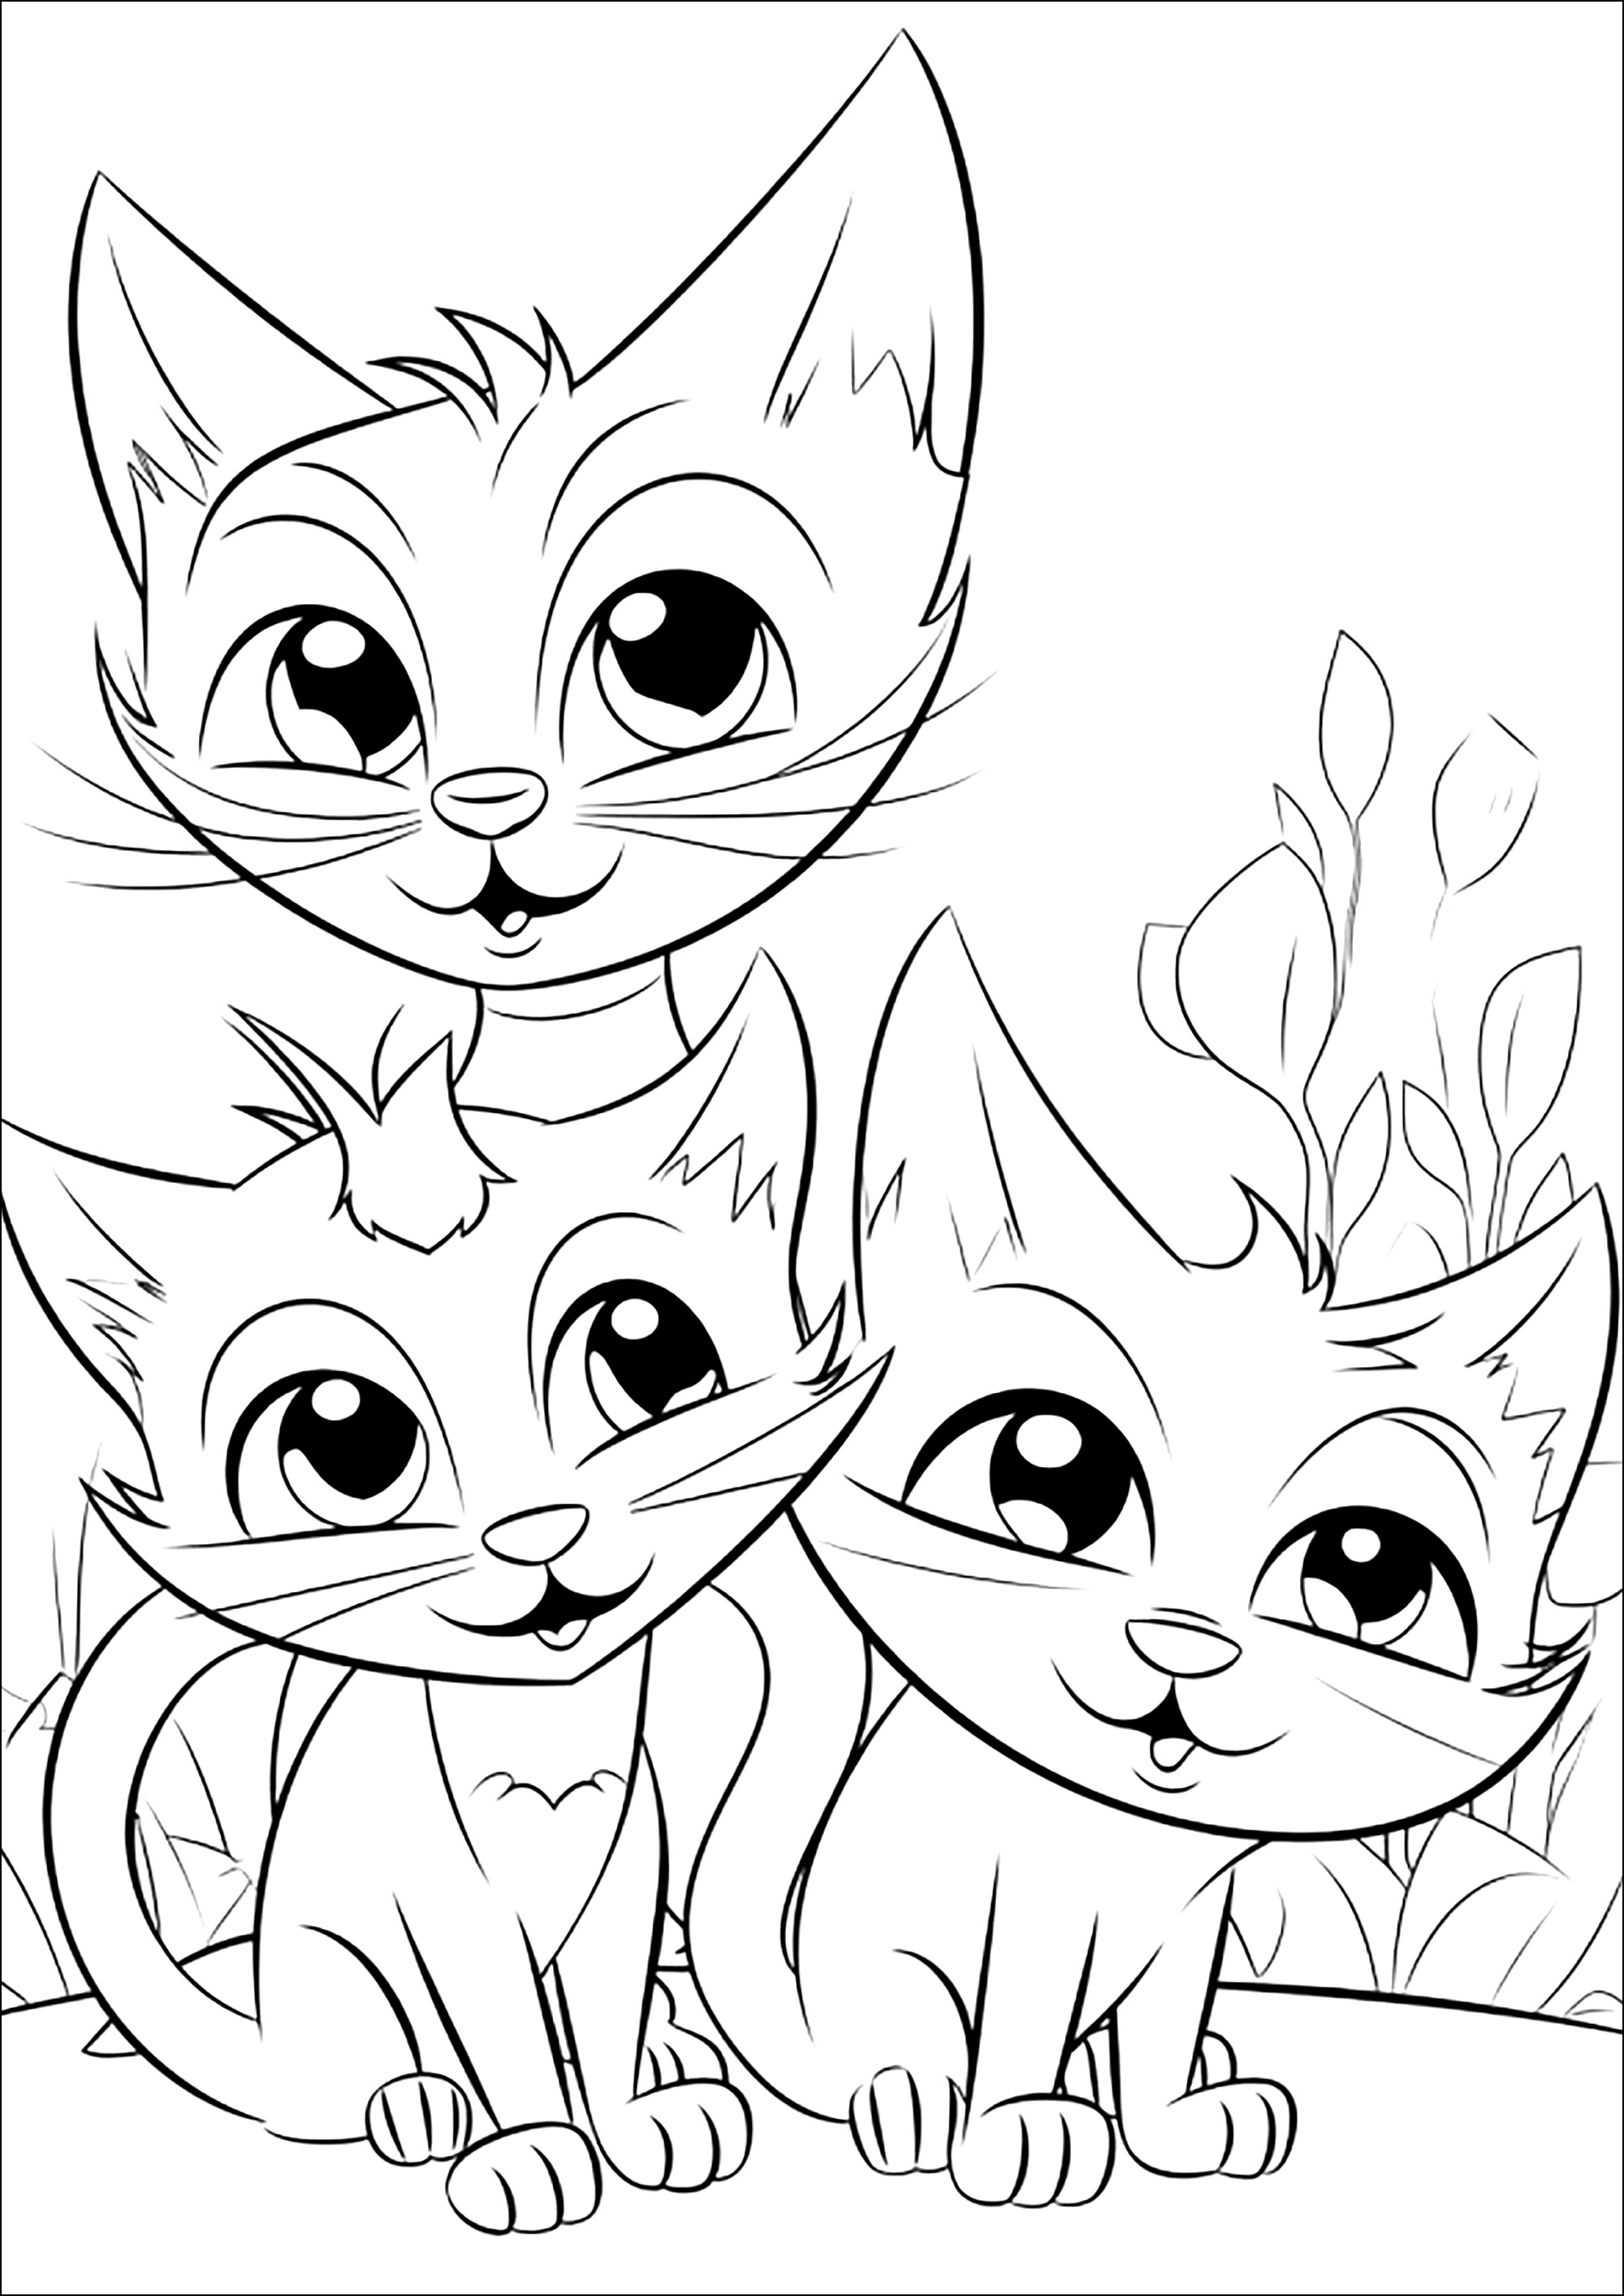 Three mischievous cats. A very simple coloring, with a few plant details in the background